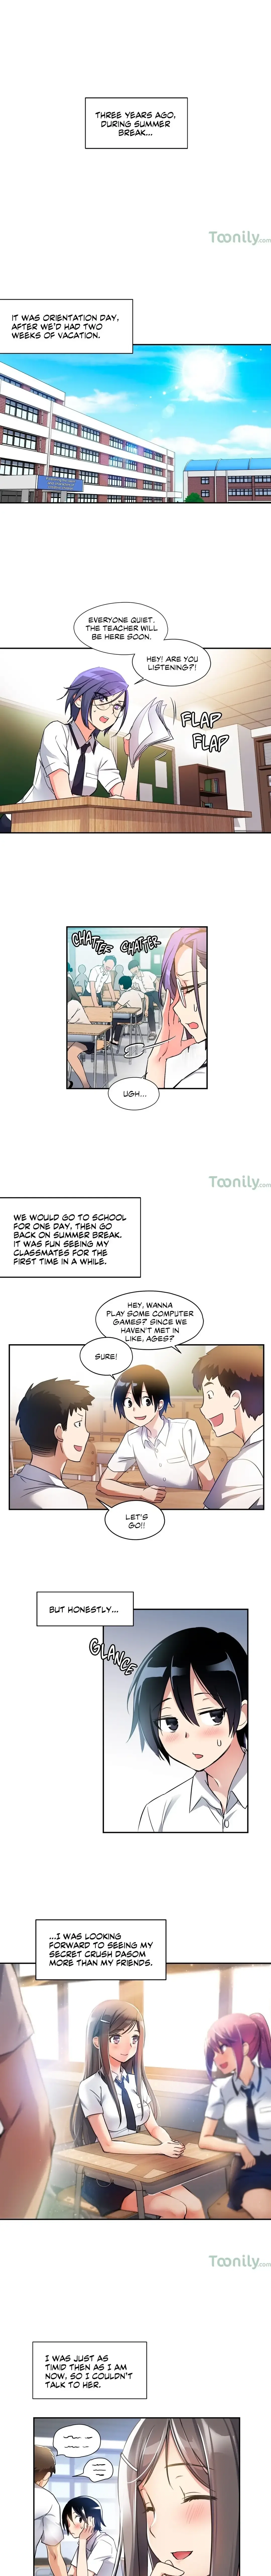 under-observation-my-first-loves-and-i-chap-3-1